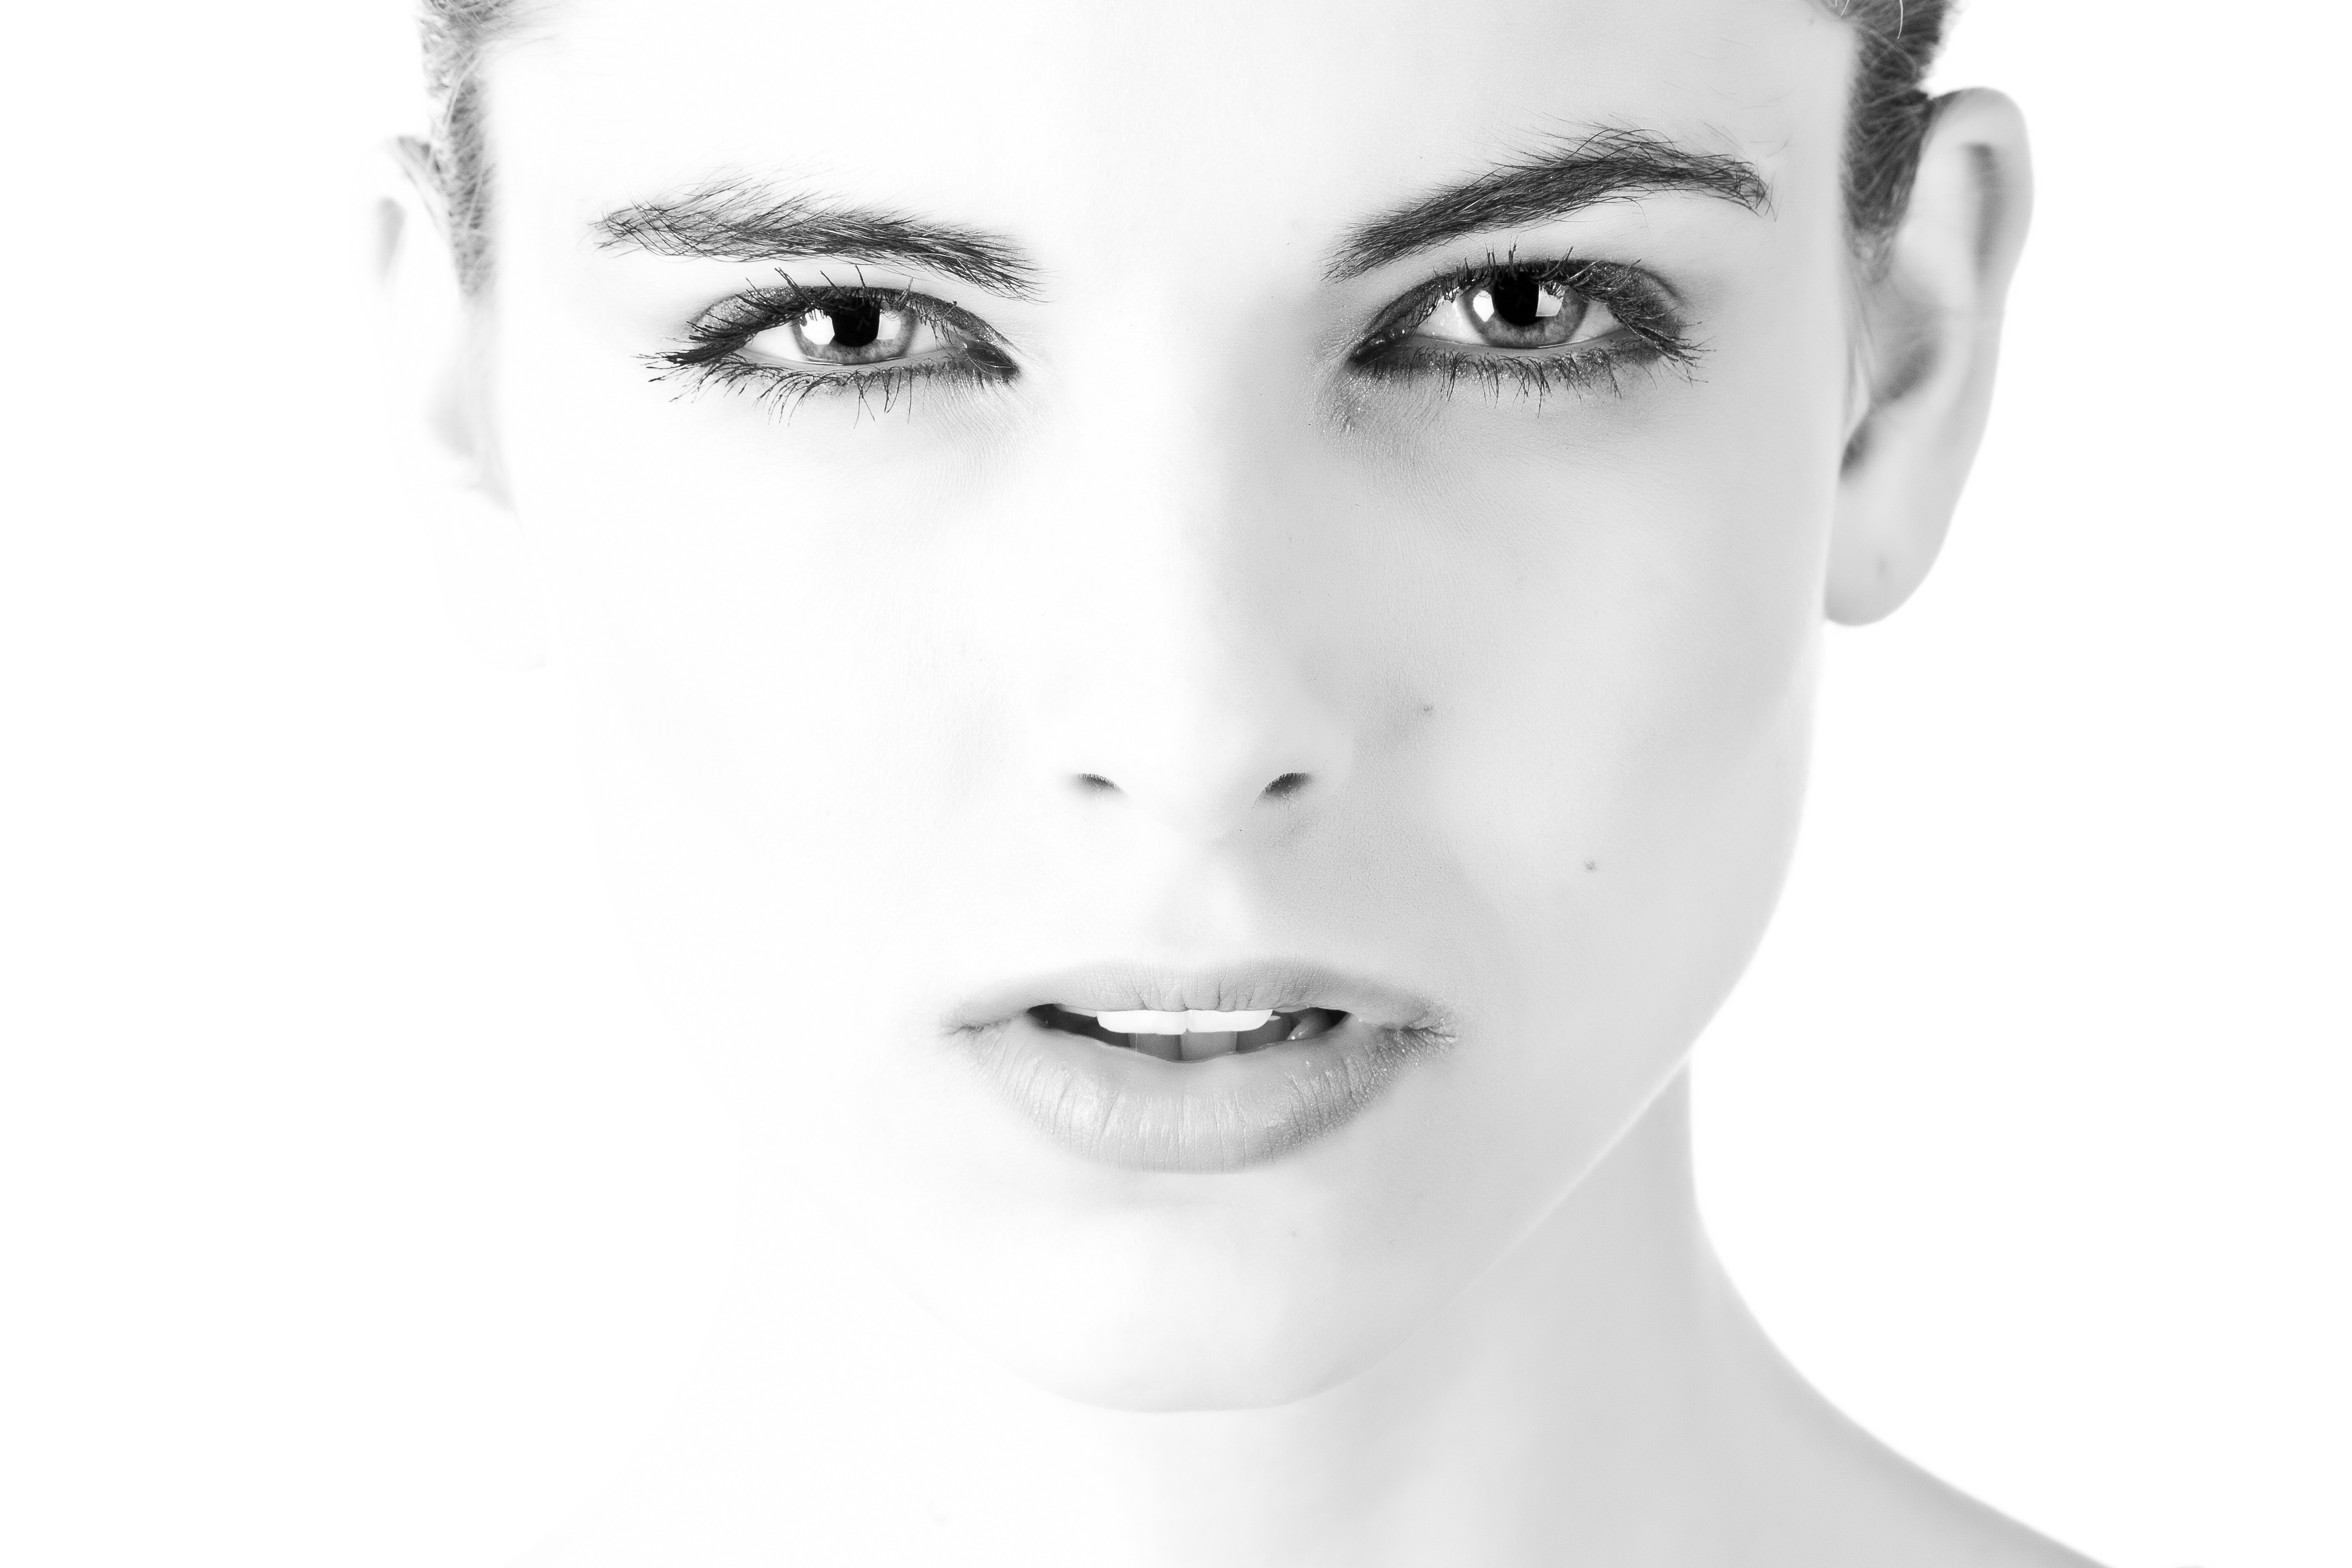 Black and white photo of beautiful woman with intense gaze and sculpted eyebrows